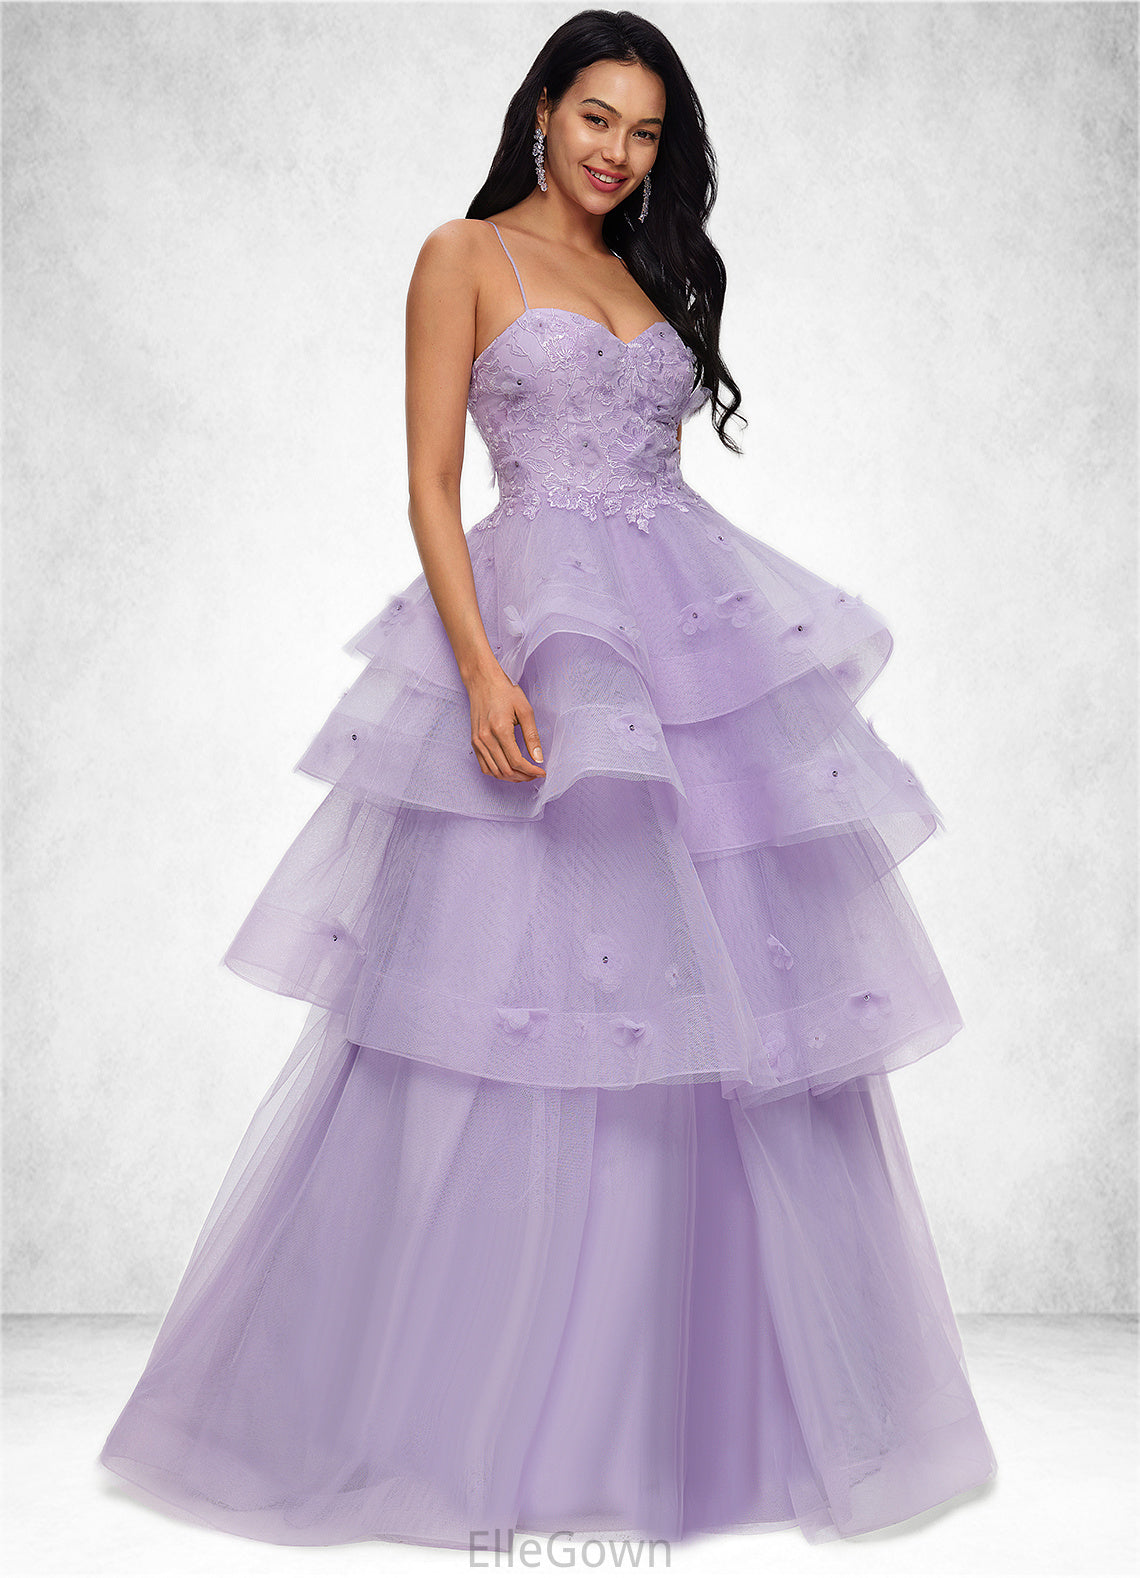 Taniyah Ball-Gown/Princess Sweetheart Floor-Length Tulle Prom Dresses With Beading Sequins DEP0022204